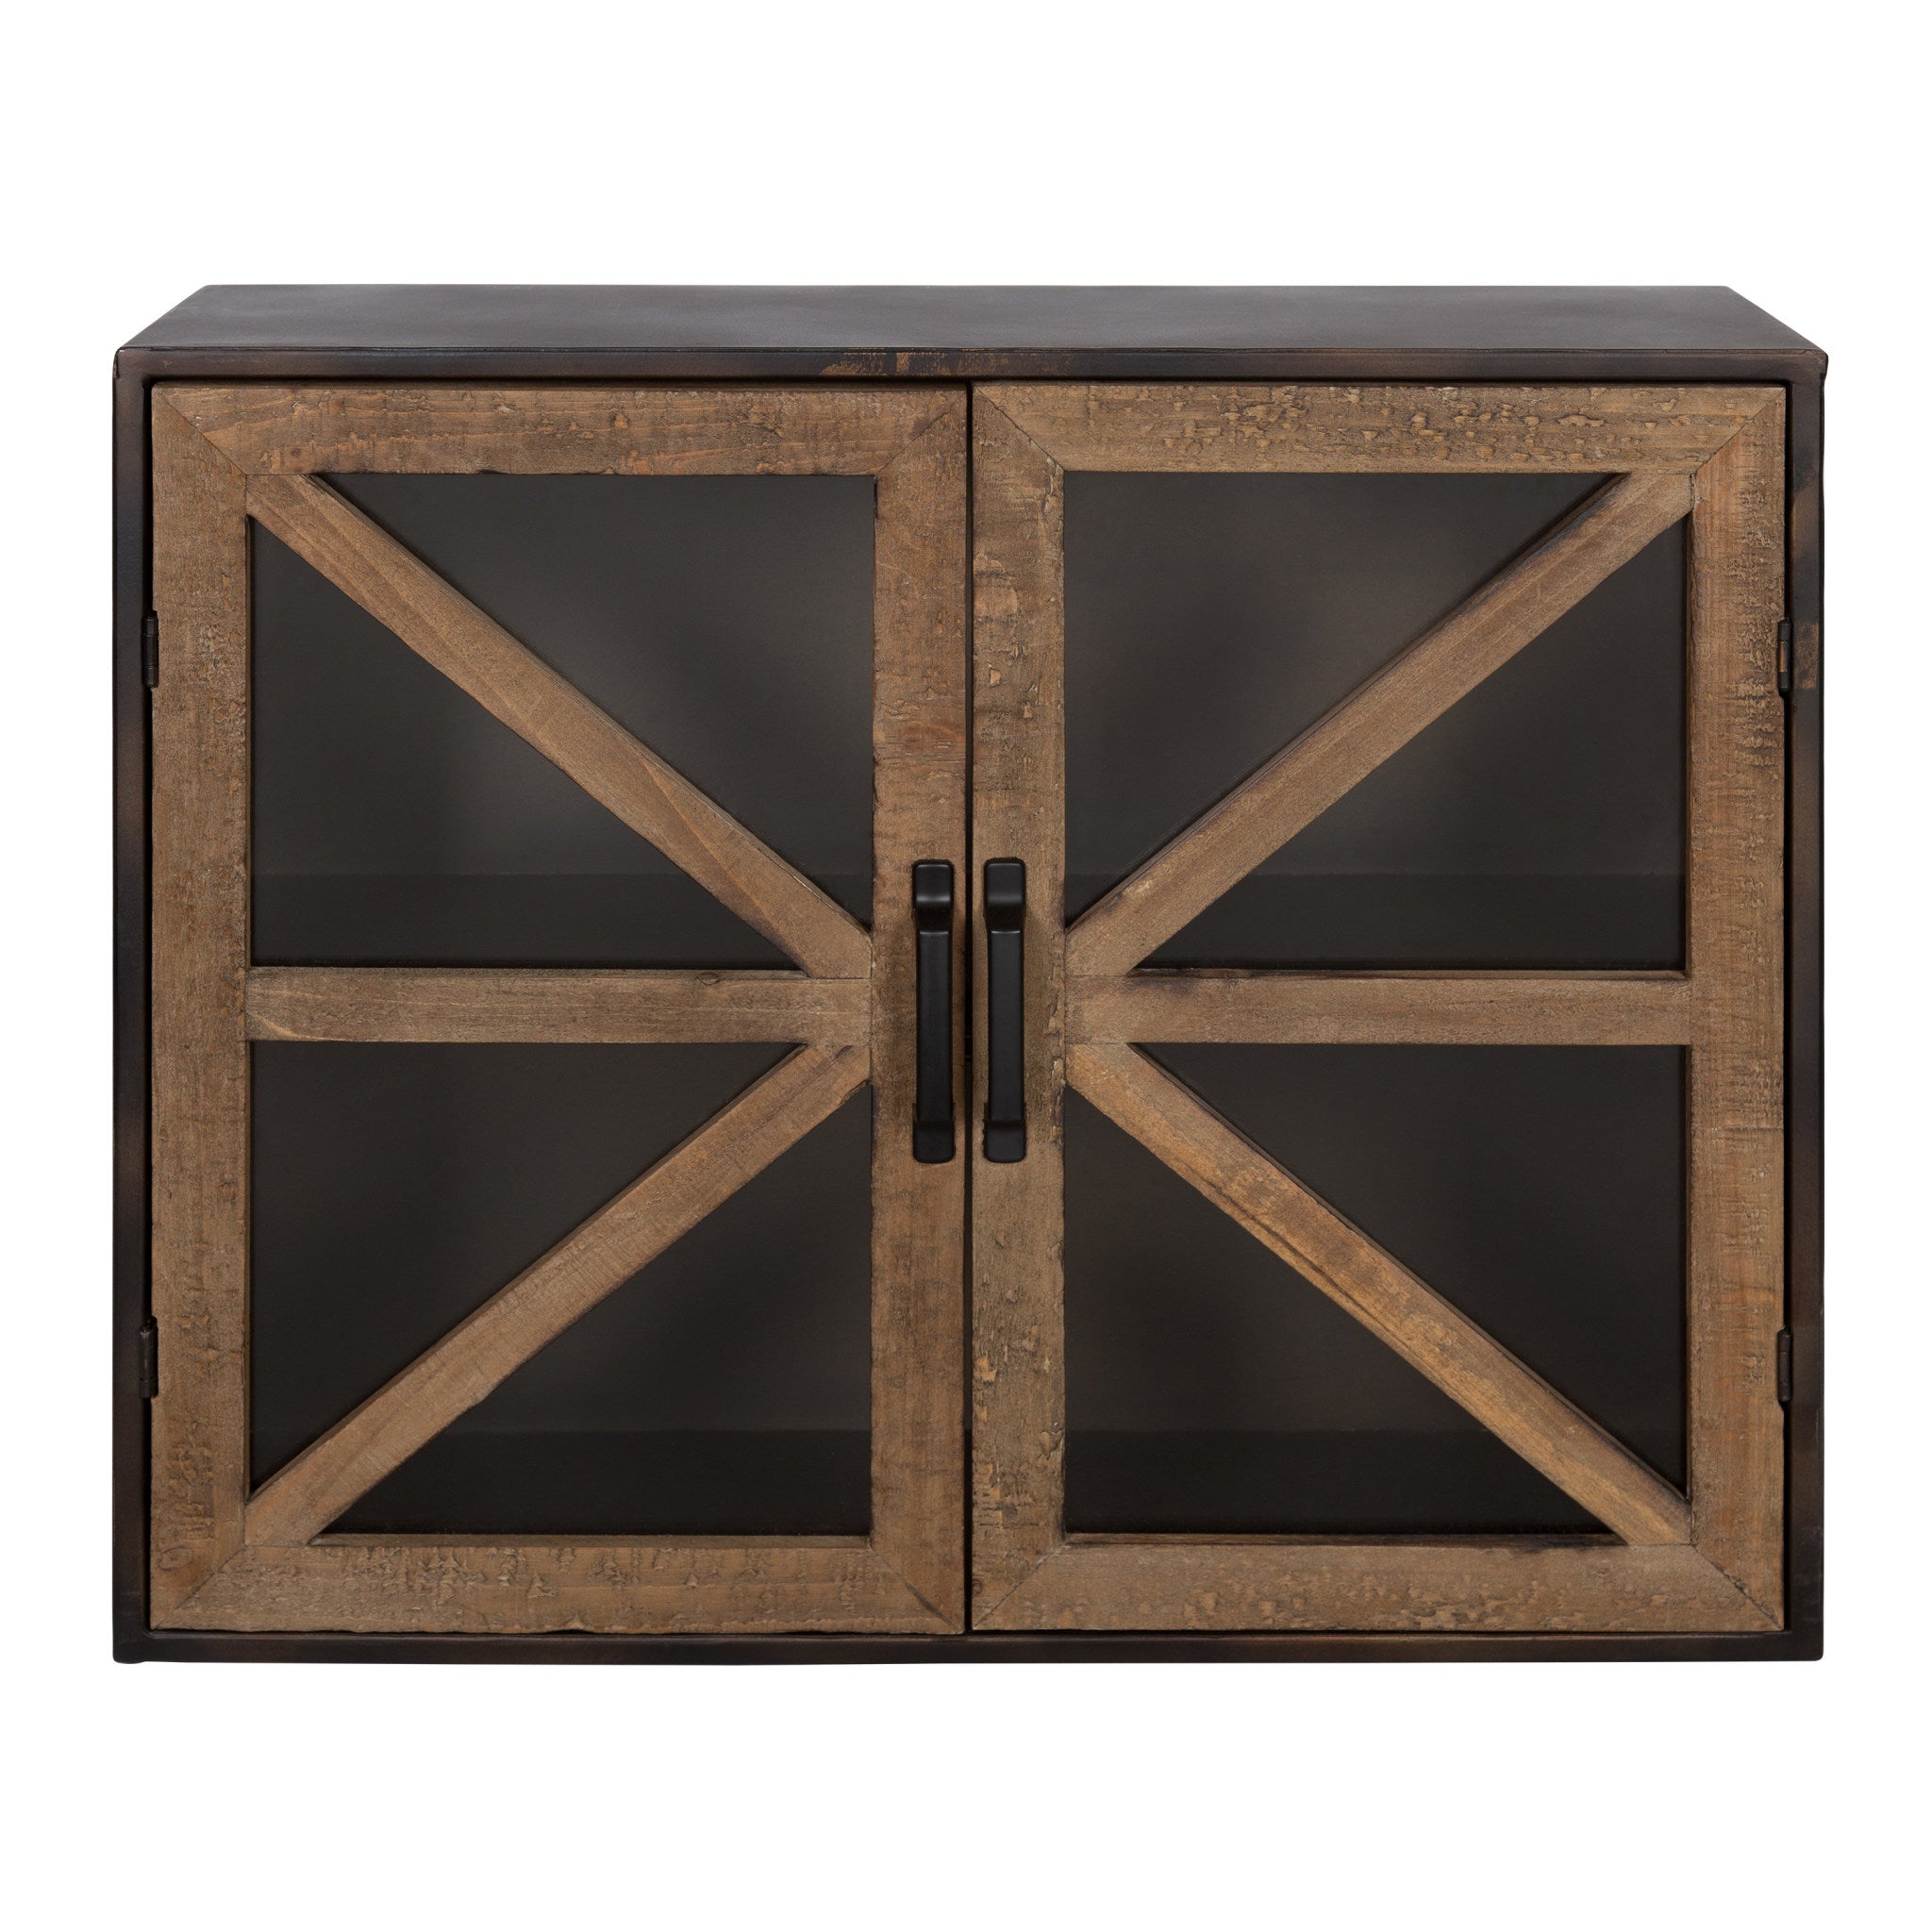 Mace Decorative Wall Mounted Rustic Wood and Metal 2-Door Cabinet